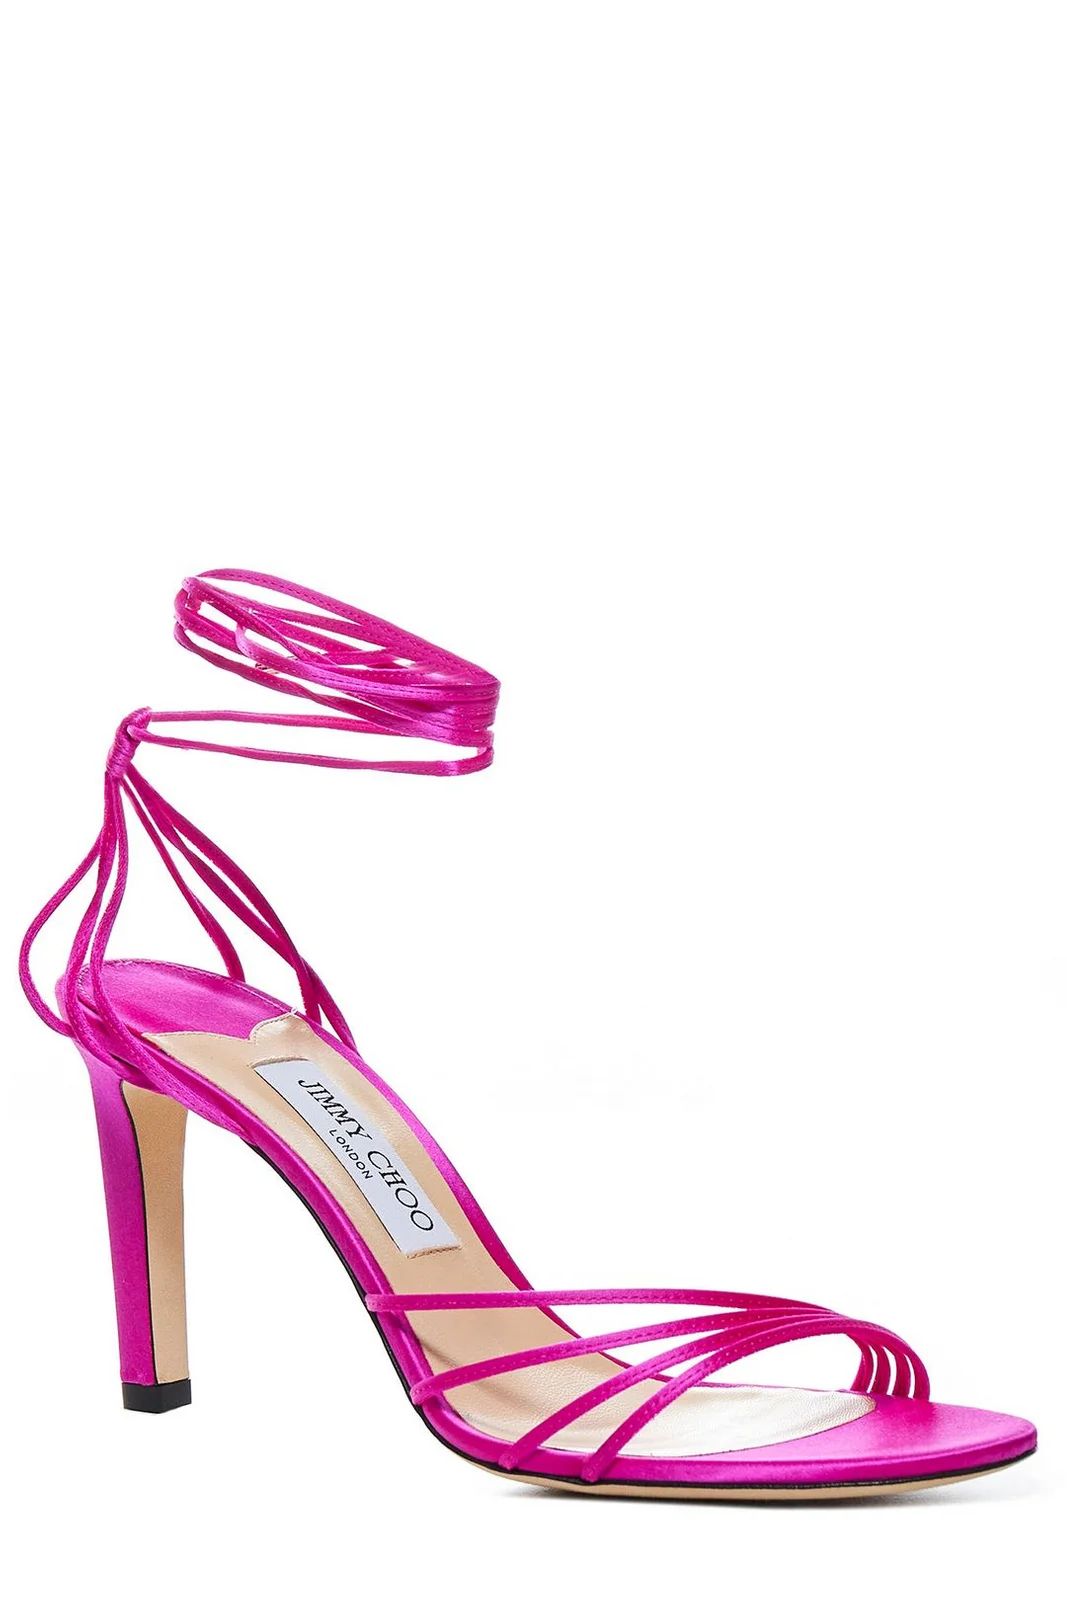 Jimmy Choo Lace-Up Heeled Sandals | Cettire Global